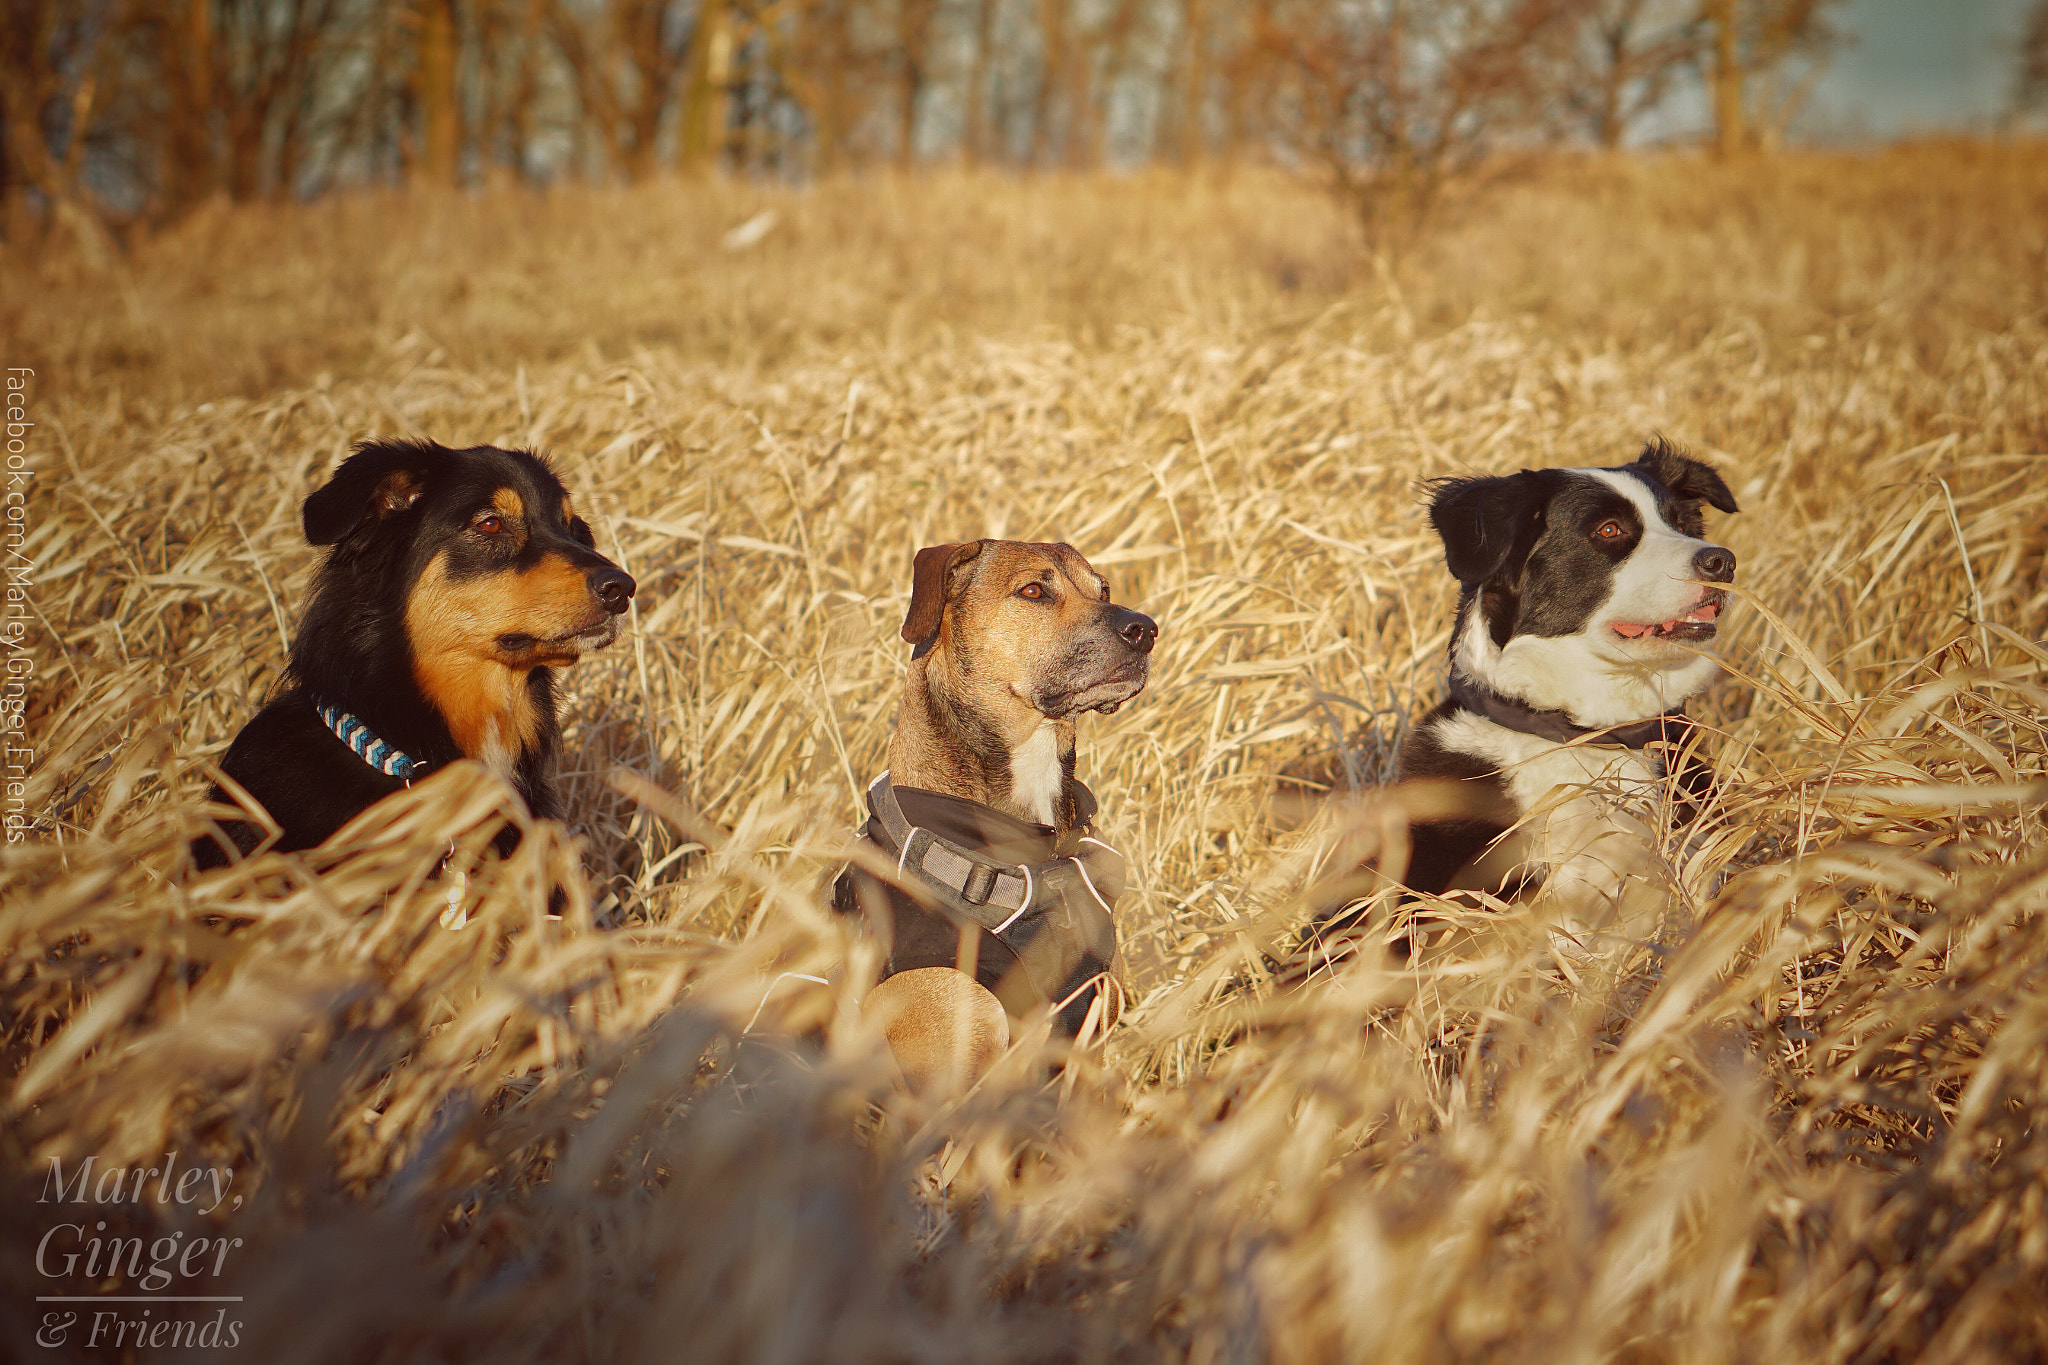 Sony a6300 + Sony E 50mm F1.8 OSS sample photo. Marley, ginger & friends photography